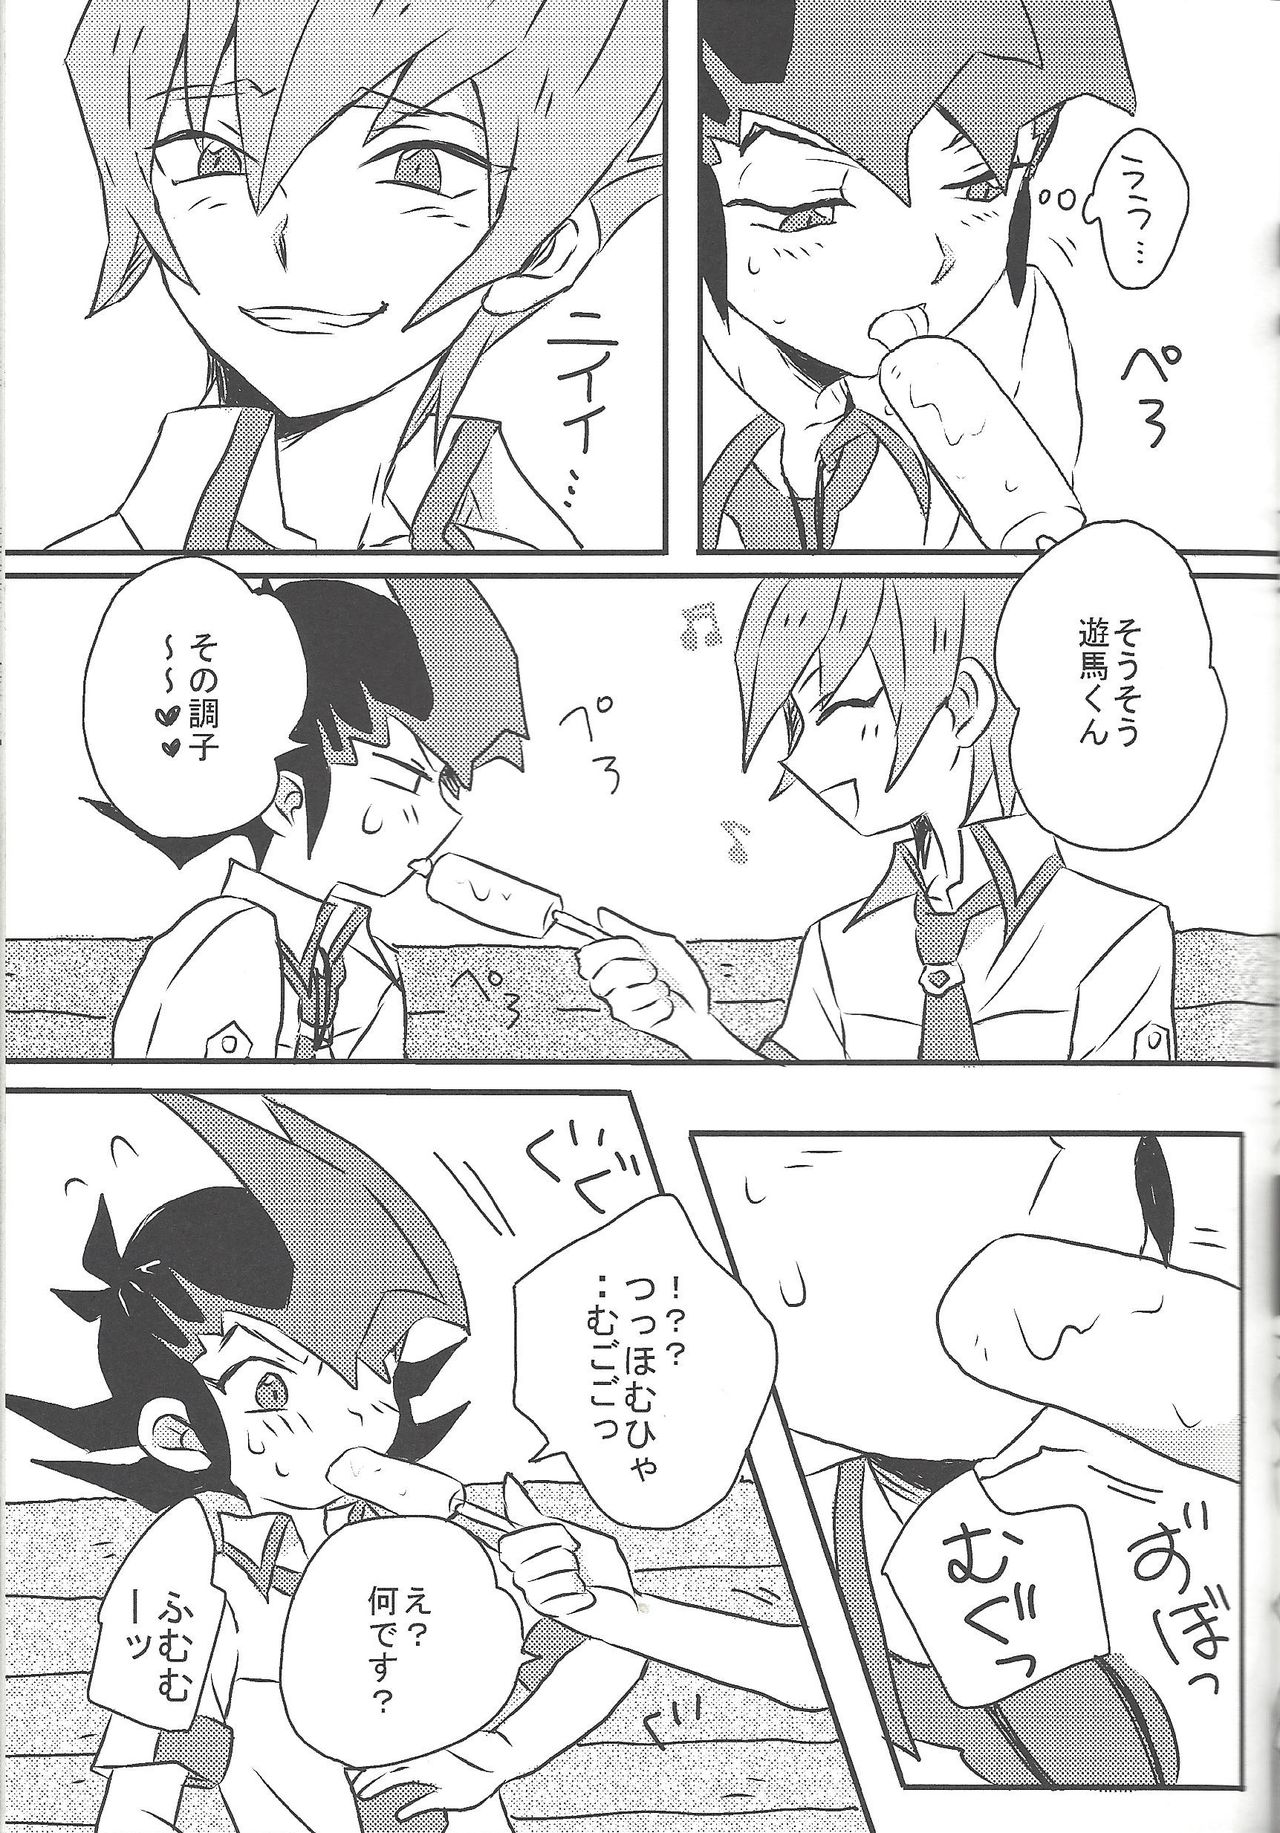 [Afternoon! (よろず)] Over ray you!! (遊☆戯☆王ZEXAL)